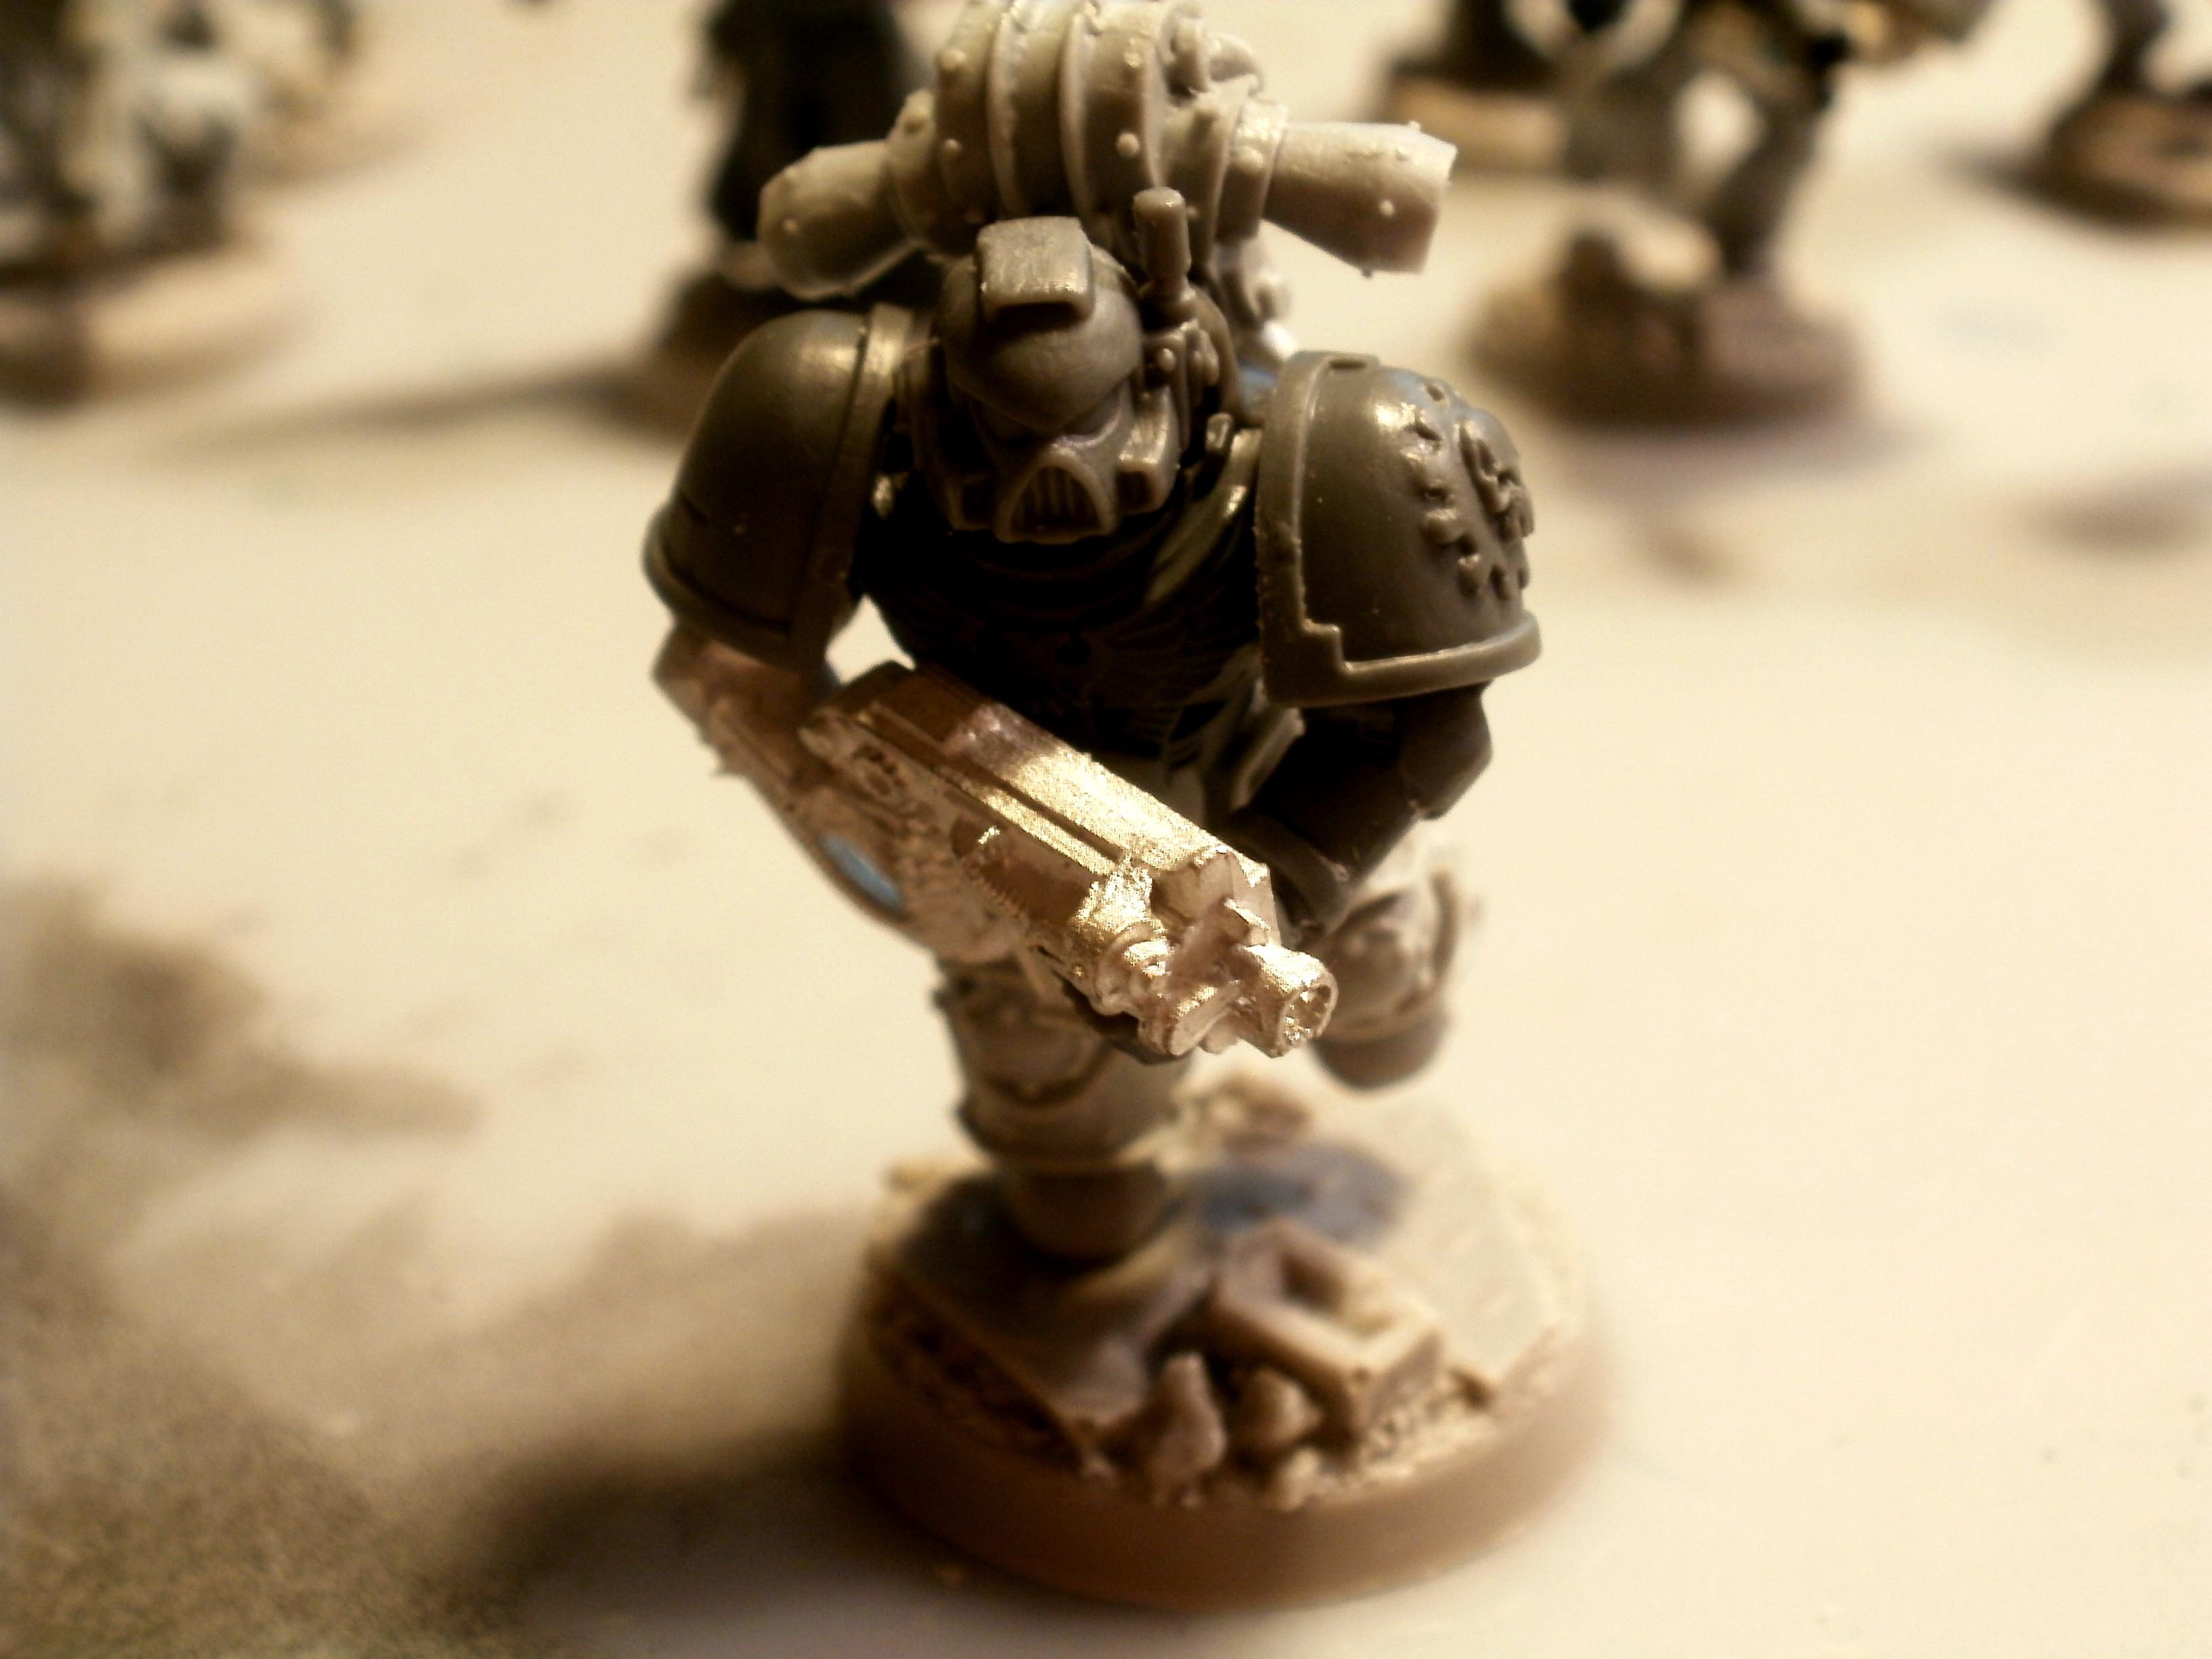 Bionics, Conversion, Dragon Forge, Forge World, Kitbash, Mk Iii Iron, Space Marines, Steel Confessors, Tactical, Work In Progress